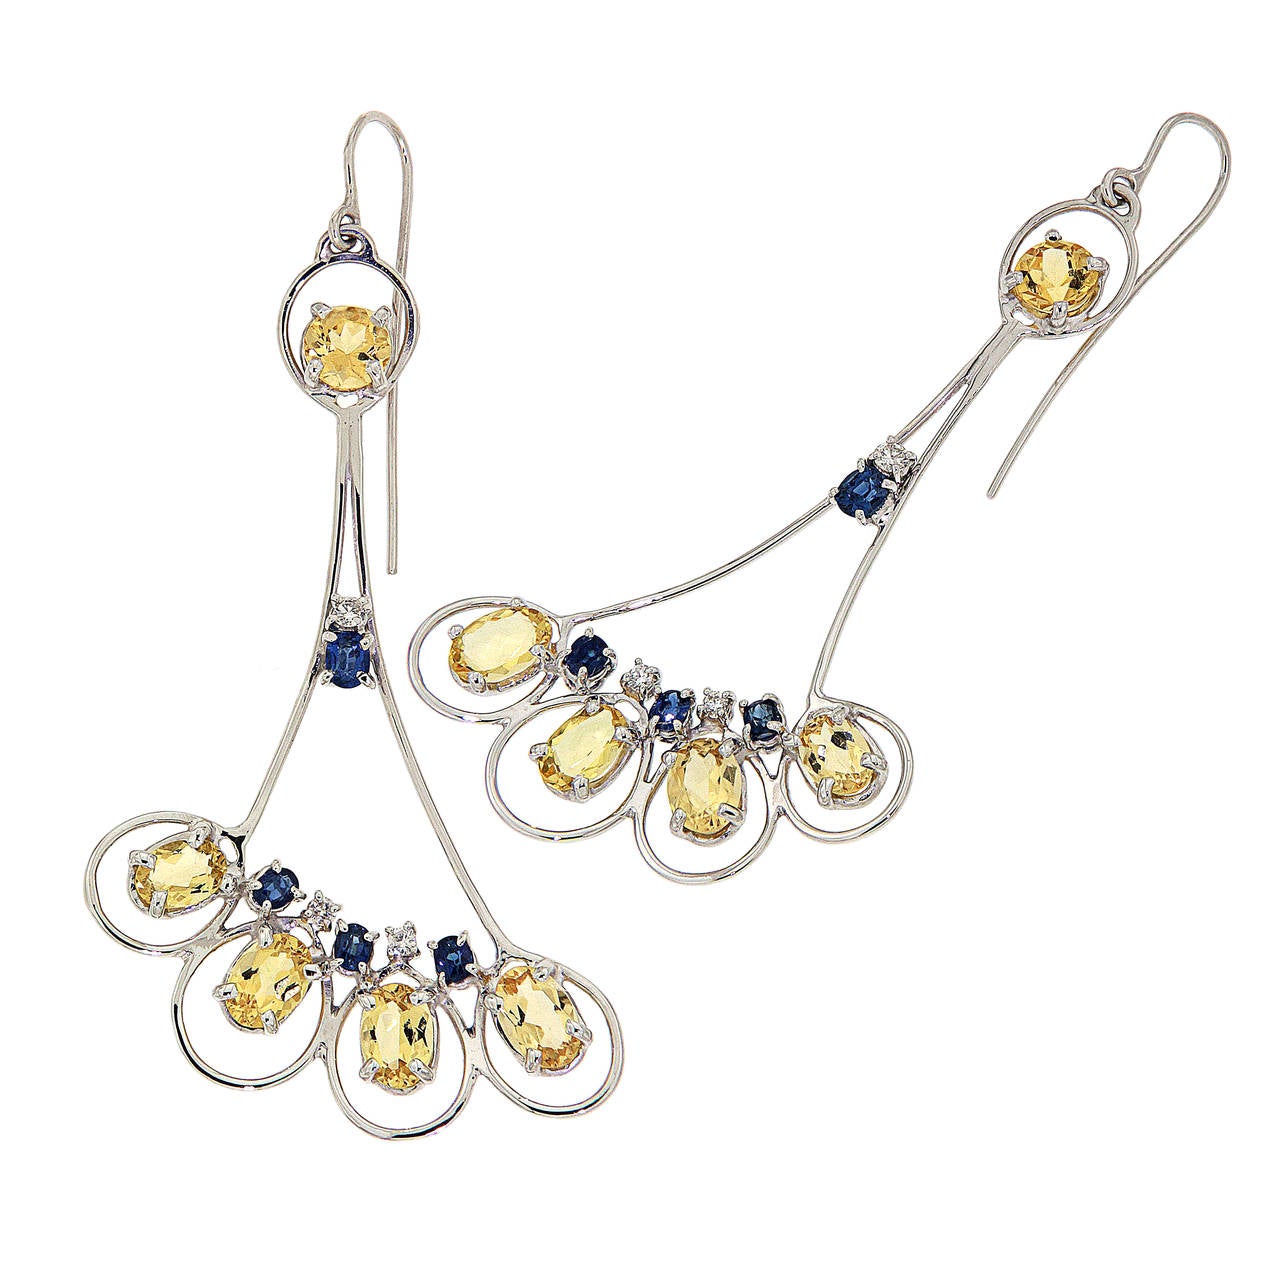 Reflecting the peacocks stunning colouring and graceful movement, these earrings display a yellow, blue and silver colour combination, handmade in 18 karat white gold these earrings are characterized by diamonds weighing 0.35 ctw, blue sapphires